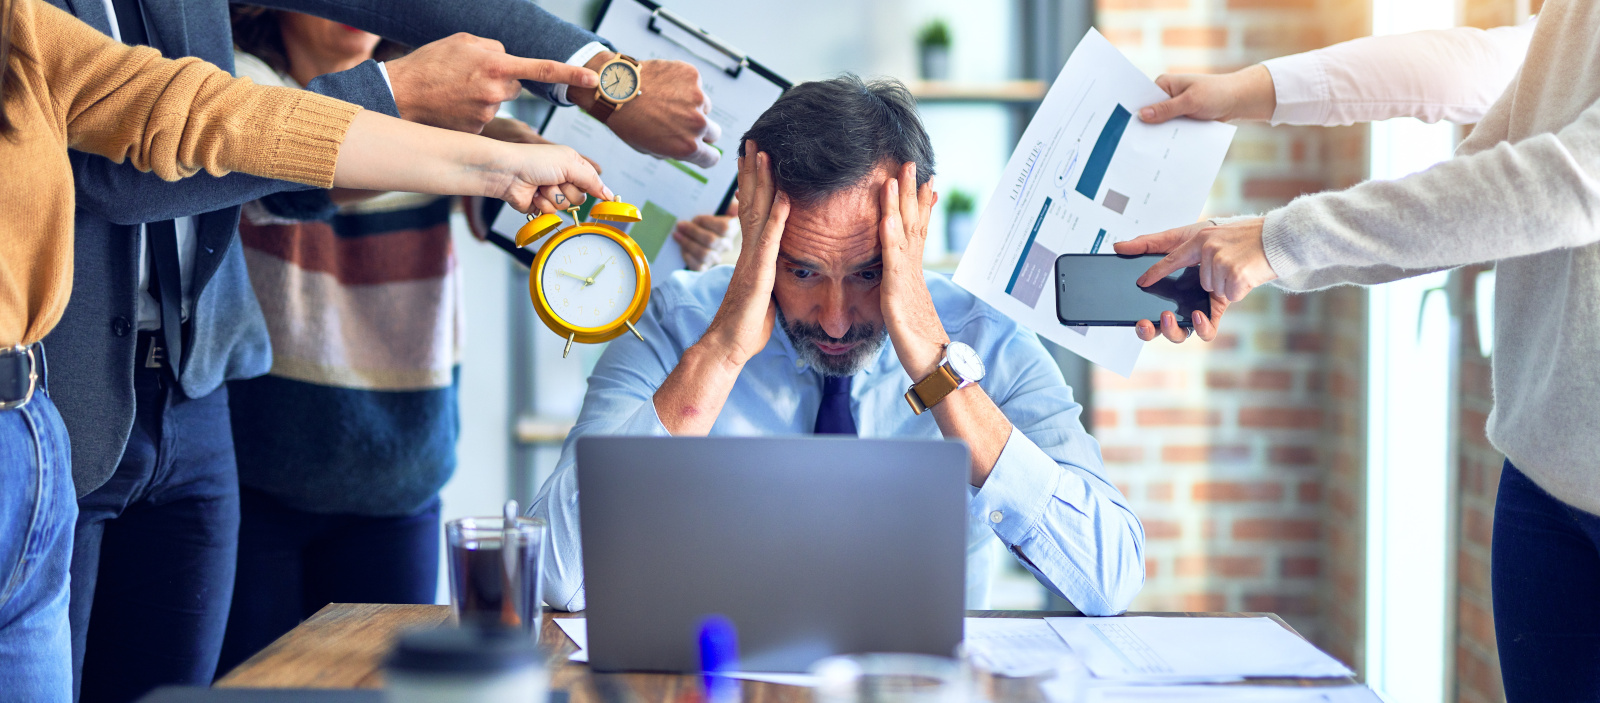 Stressed out recruitment consultant using outdated working methods